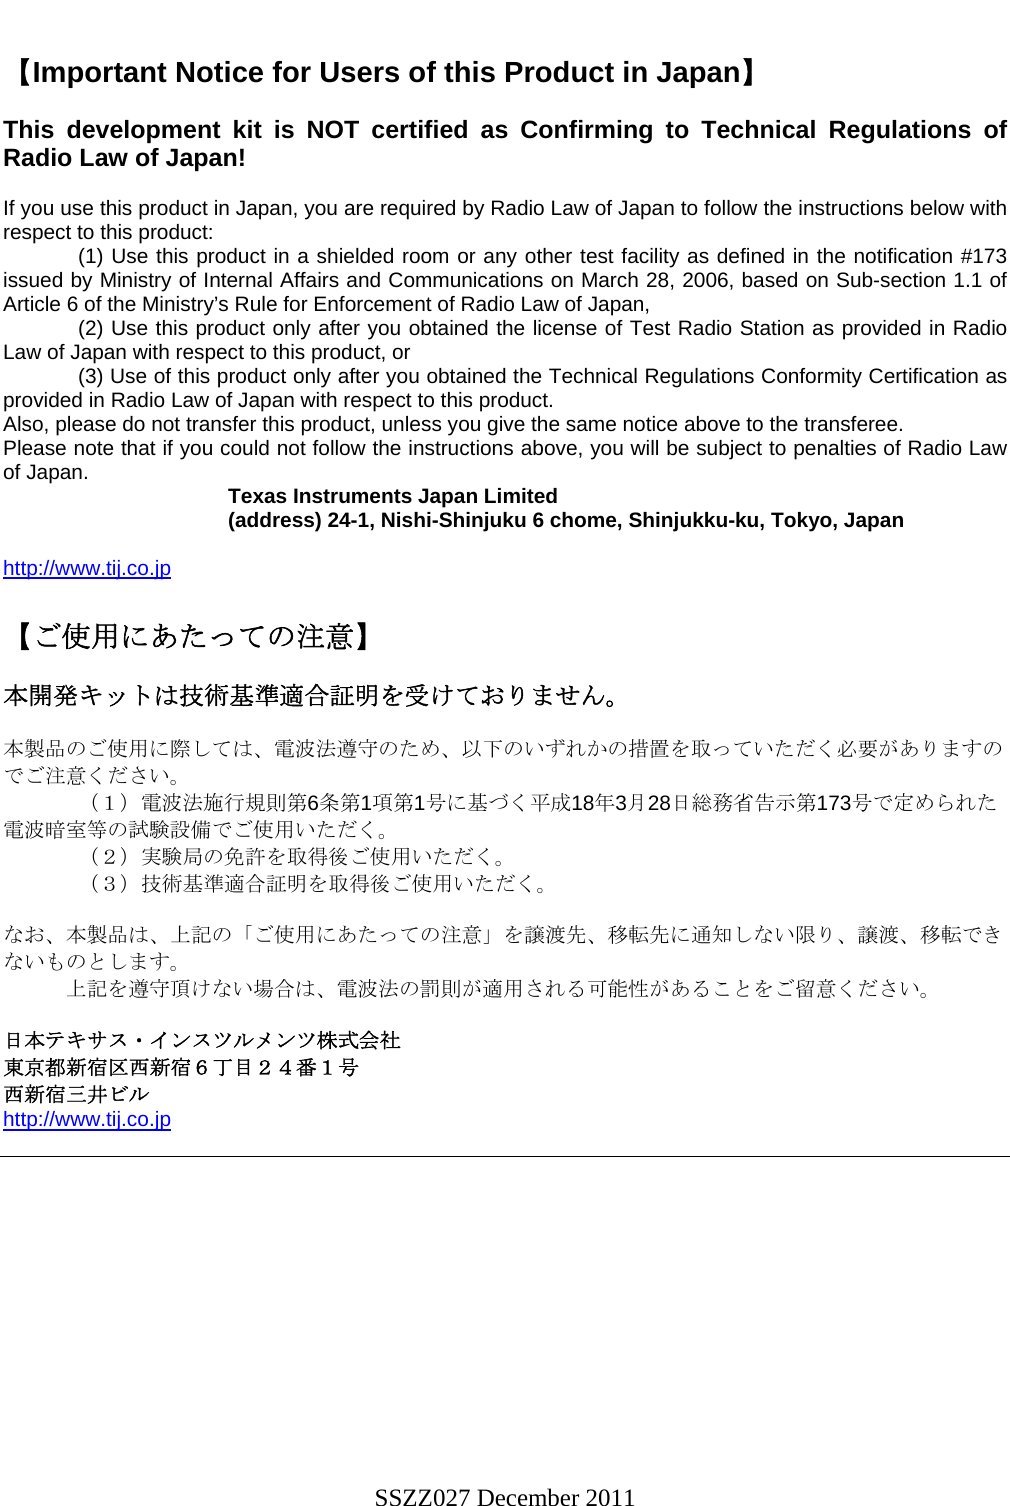     【Important Notice for Users of this Product in Japan】  This development kit is NOT certified as Confirming to Technical Regulations of Radio Law of Japan!  If you use this product in Japan, you are required by Radio Law of Japan to follow the instructions below with respect to this product:     (1) Use this product in a shielded room or any other test facility as defined in the notification #173 issued by Ministry of Internal Affairs and Communications on March 28, 2006, based on Sub-section 1.1 of Article 6 of the Ministry’s Rule for Enforcement of Radio Law of Japan,     (2) Use this product only after you obtained the license of Test Radio Station as provided in Radio Law of Japan with respect to this product, or    (3) Use of this product only after you obtained the Technical Regulations Conformity Certification as provided in Radio Law of Japan with respect to this product.  Also, please do not transfer this product, unless you give the same notice above to the transferee. Please note that if you could not follow the instructions above, you will be subject to penalties of Radio Law of Japan.    Texas Instruments Japan Limited   (address) 24-1, Nishi-Shinjuku 6 chome, Shinjukku-ku, Tokyo, Japan  http://www.tij.co.jp  【ご使用にあたっての注意】  本開発キットは技術基準適合証明を受けておりません。  本製品のご使用に際しては、電波法遵守のため、以下のいずれかの措置を取っていただく必要がありますのでご注意ください。   （１）電波法施行規則第6条第1項第1号に基づく平成18年3月28日総務省告示第173号で定められた電波暗室等の試験設備でご使用いただく。   （２）実験局の免許を取得後ご使用いただく。   （３）技術基準適合証明を取得後ご使用いただく。  なお、本製品は、上記の「ご使用にあたっての注意」を譲渡先、移転先に通知しない限り、譲渡、移転できないものとします。       上記を遵守頂けない場合は、電波法の罰則が適用される可能性があることをご留意ください。  日本テキサス・インスツルメンツ株式会社 東京都新宿区西新宿６丁目２４番１号 西新宿三井ビル http://www.tij.co.jp   SSZZ027 December 2011 